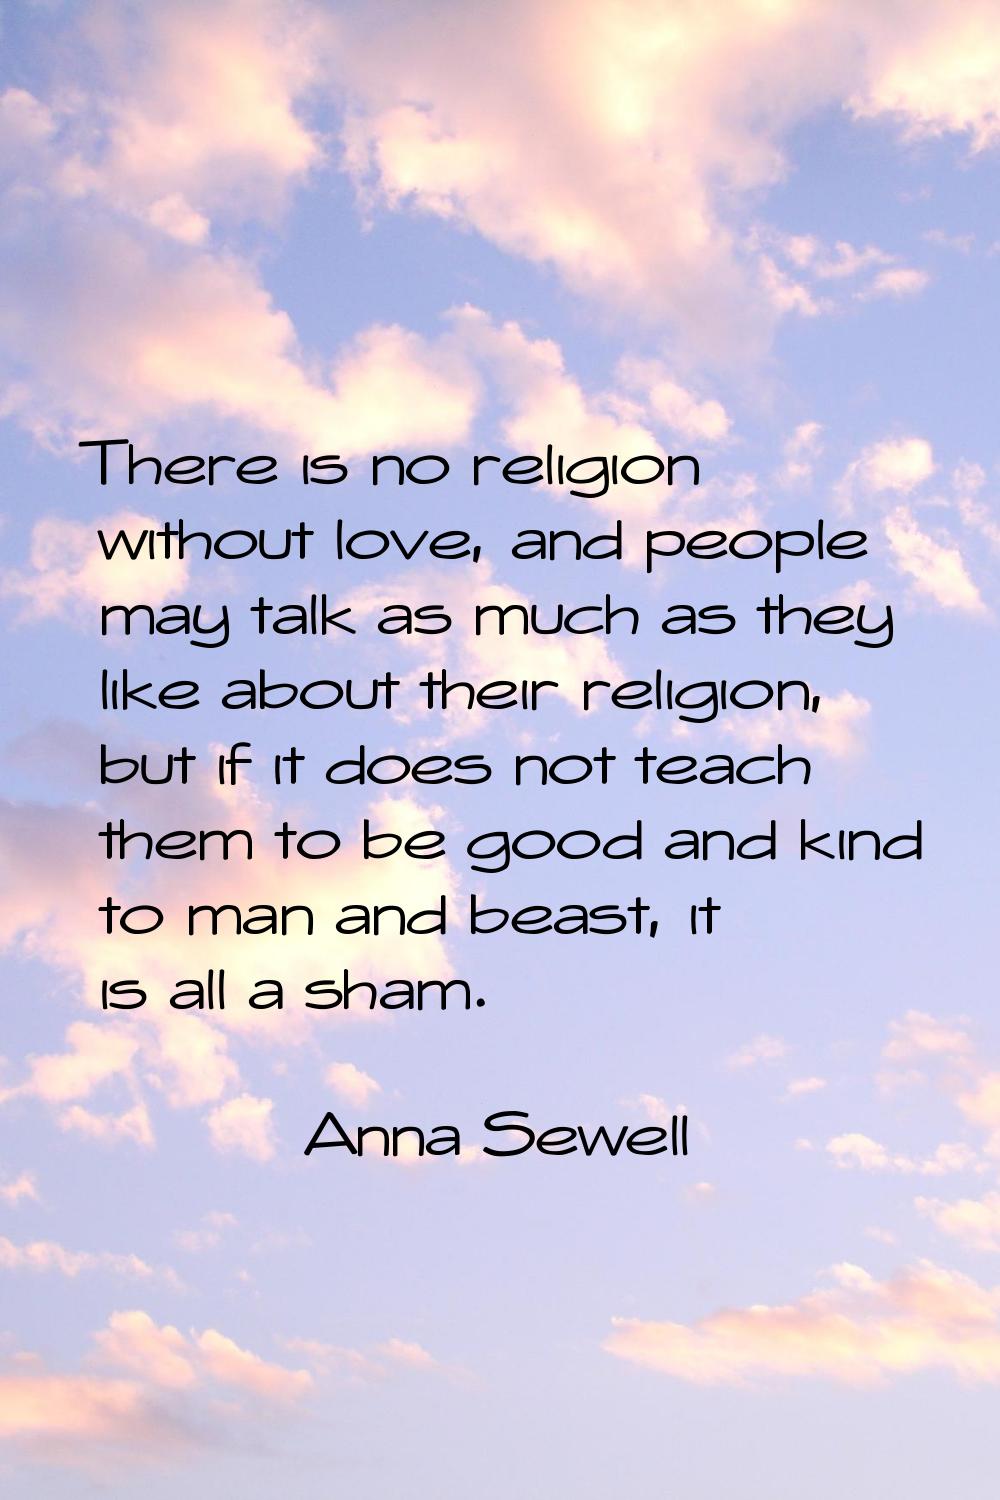 There is no religion without love, and people may talk as much as they like about their religion, b